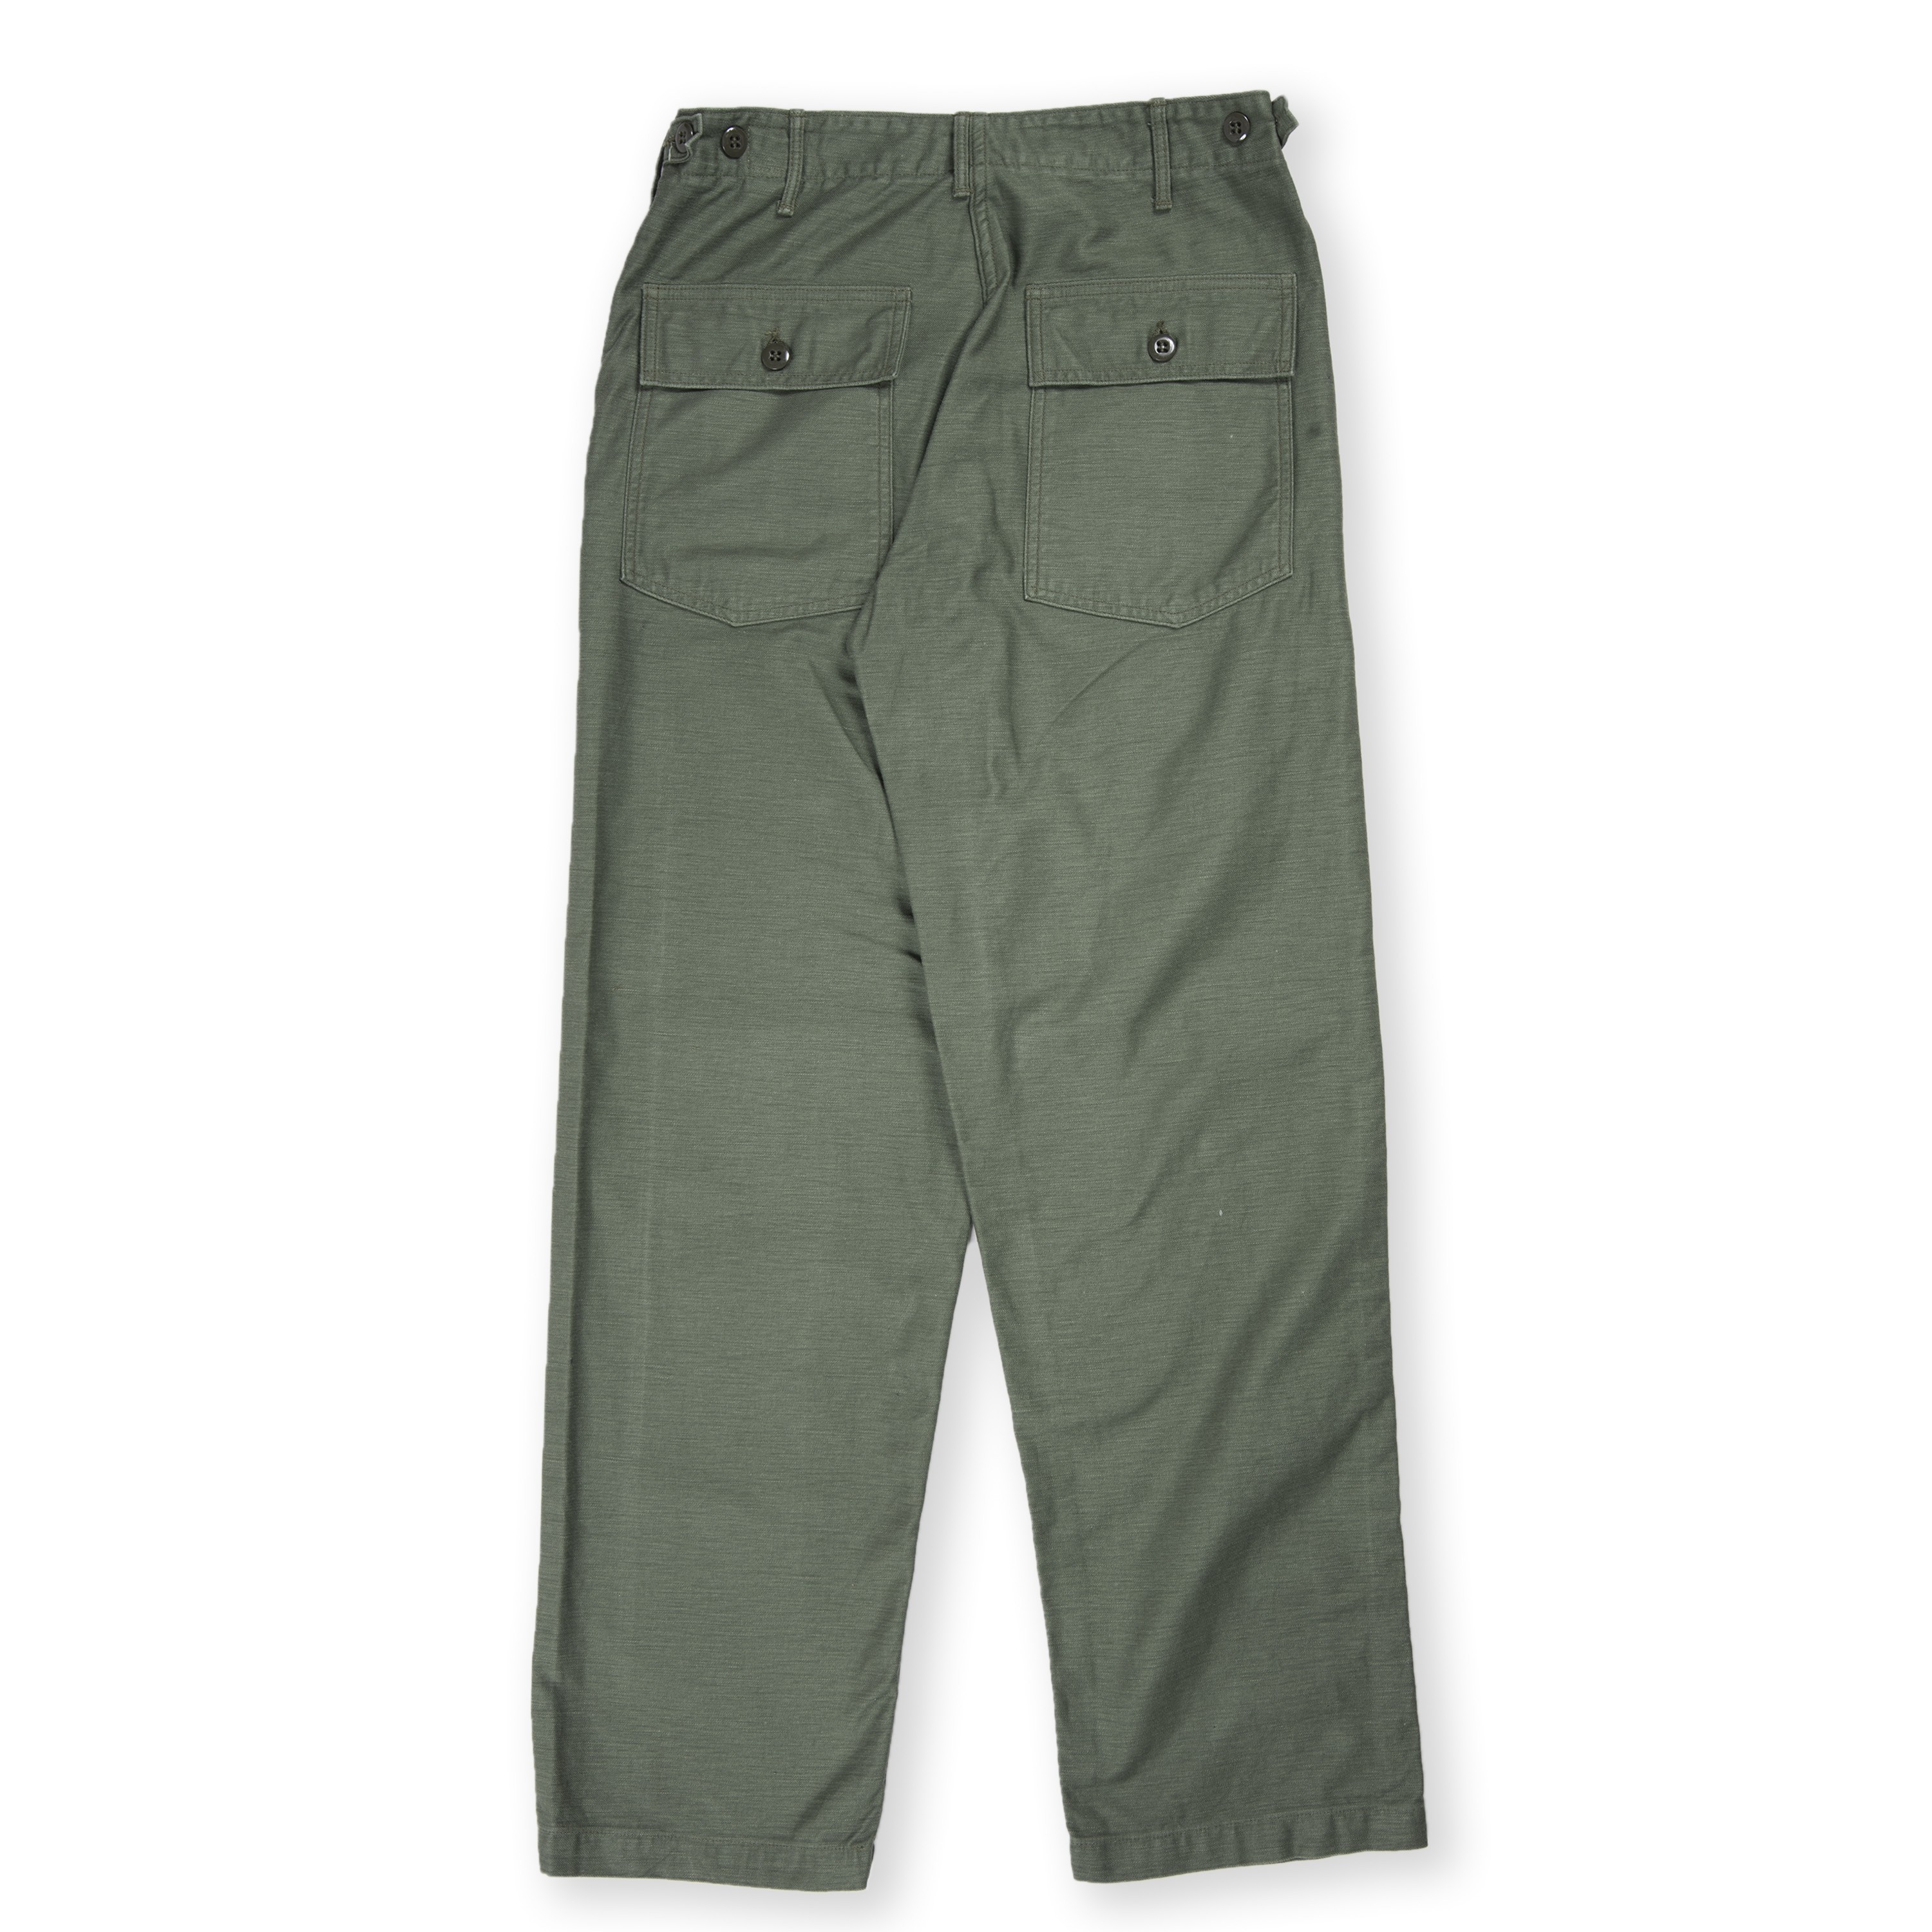 Army Fatigue Trousers: The Ultimate Guide to Military Fashion